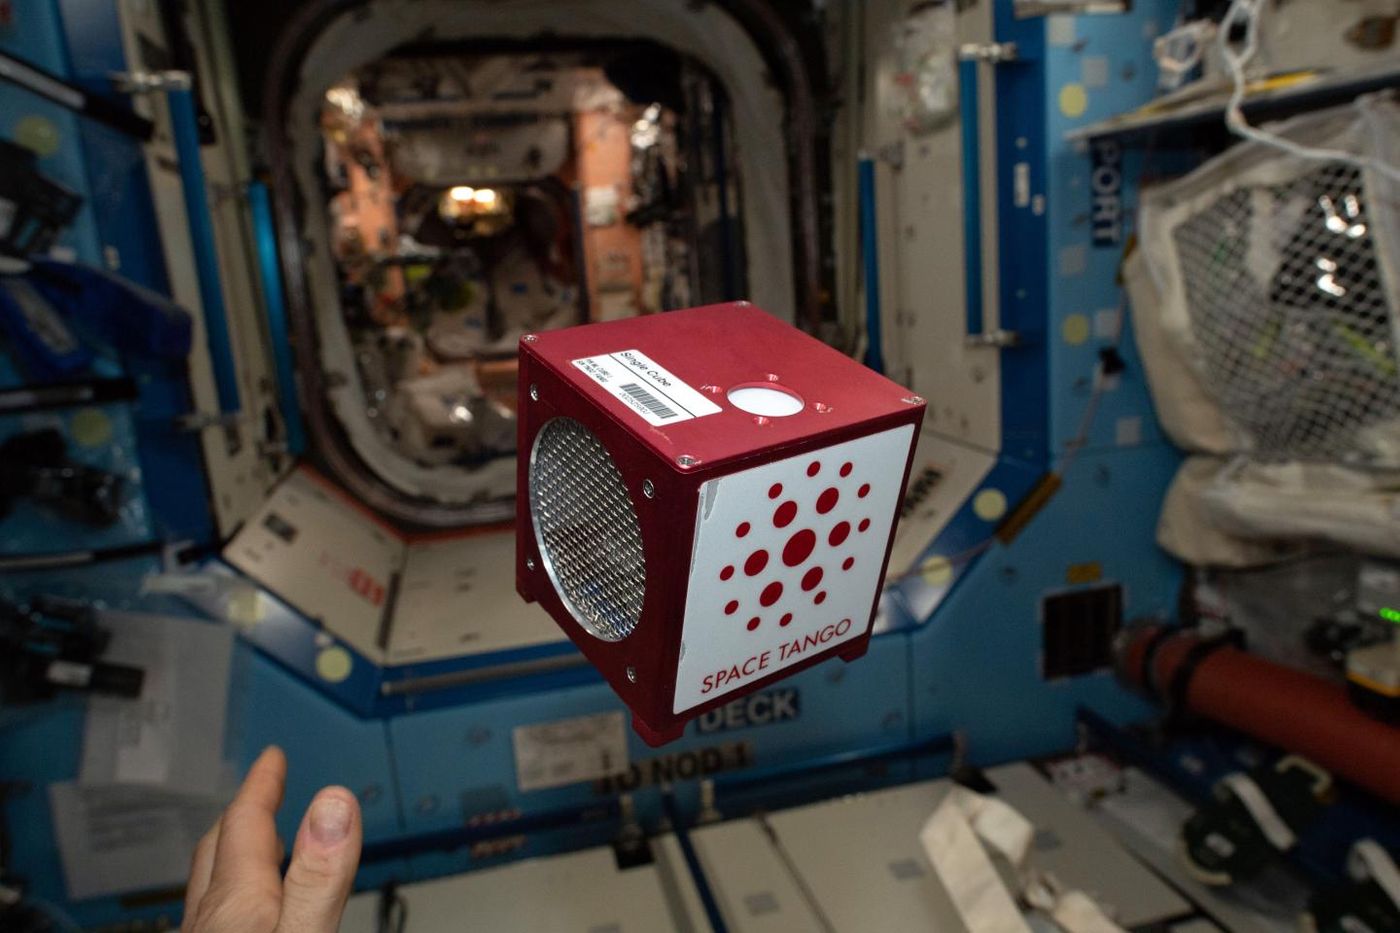 Space Tango CubeLab on board the International Space Station ISS. / Credit: Space Tango